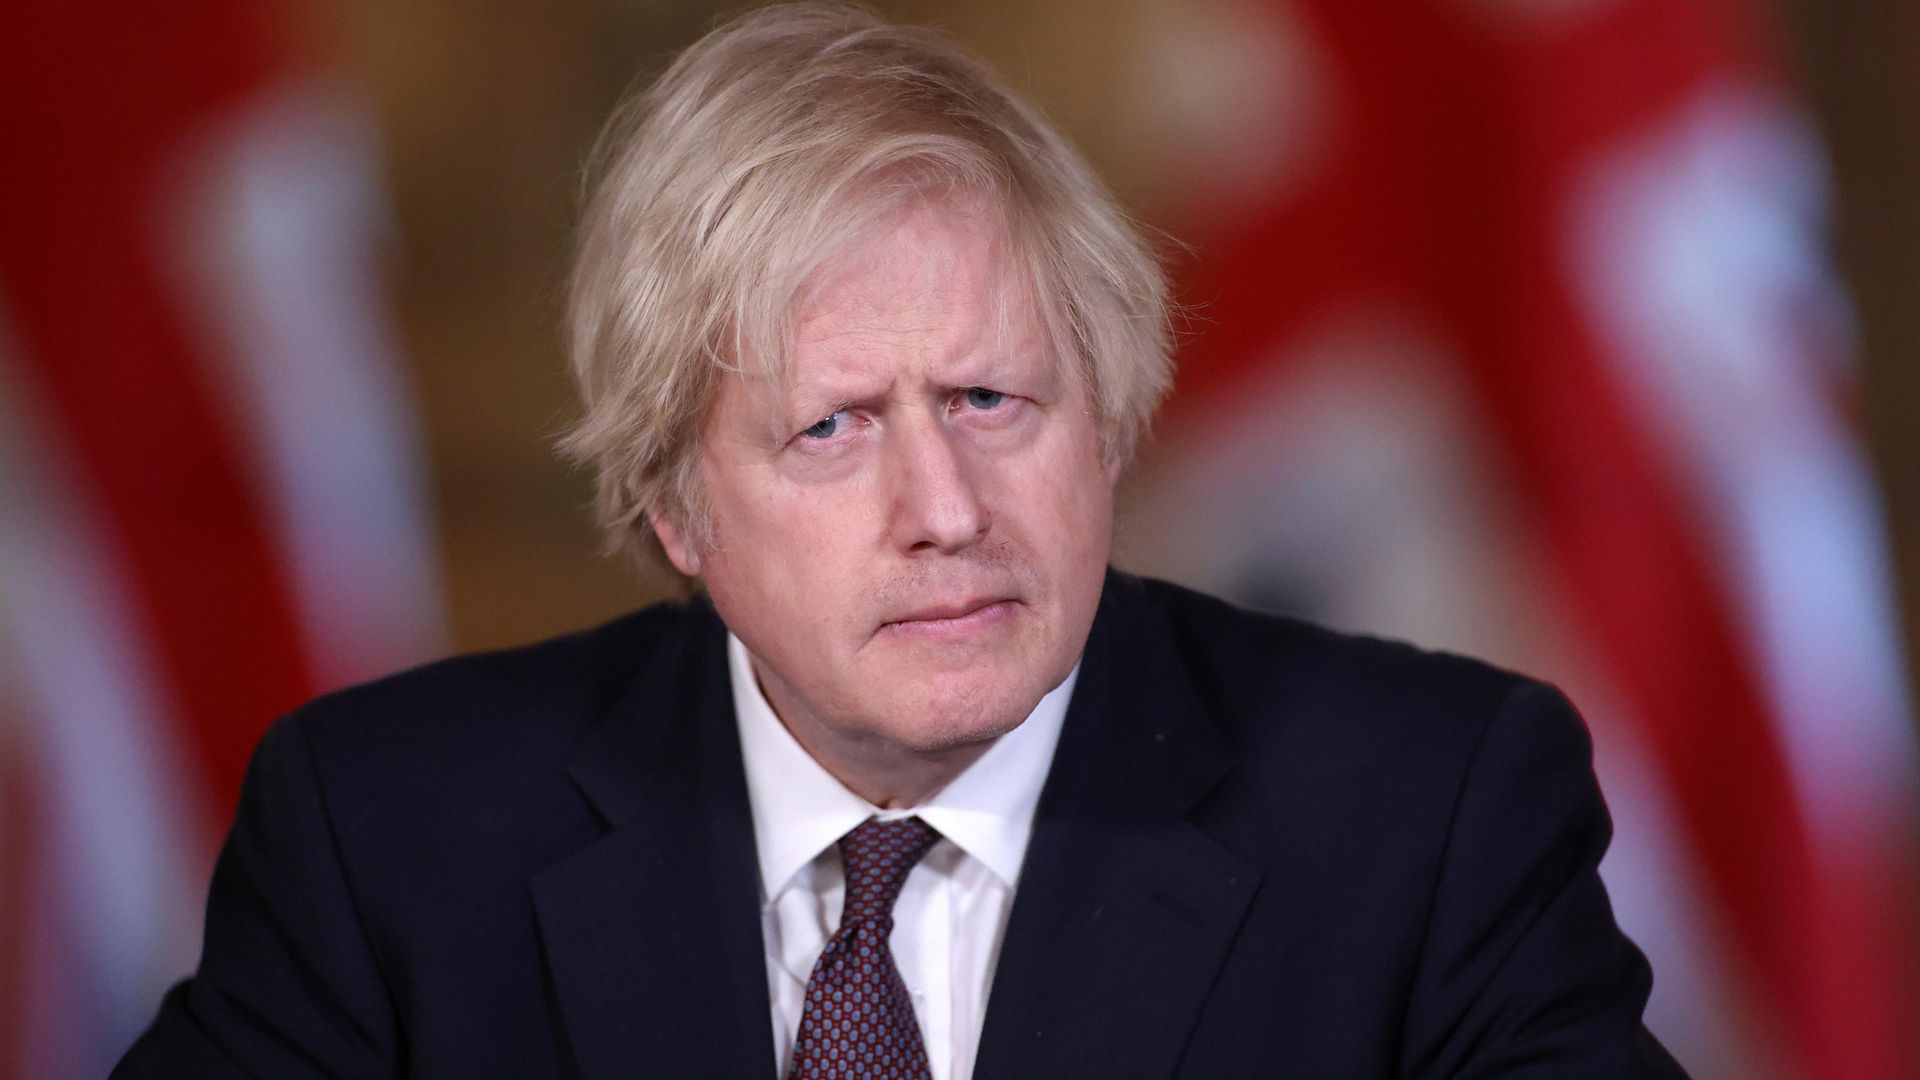 Prime Minister Boris Johnson during a media briefing in Downing Street - Credit: PA